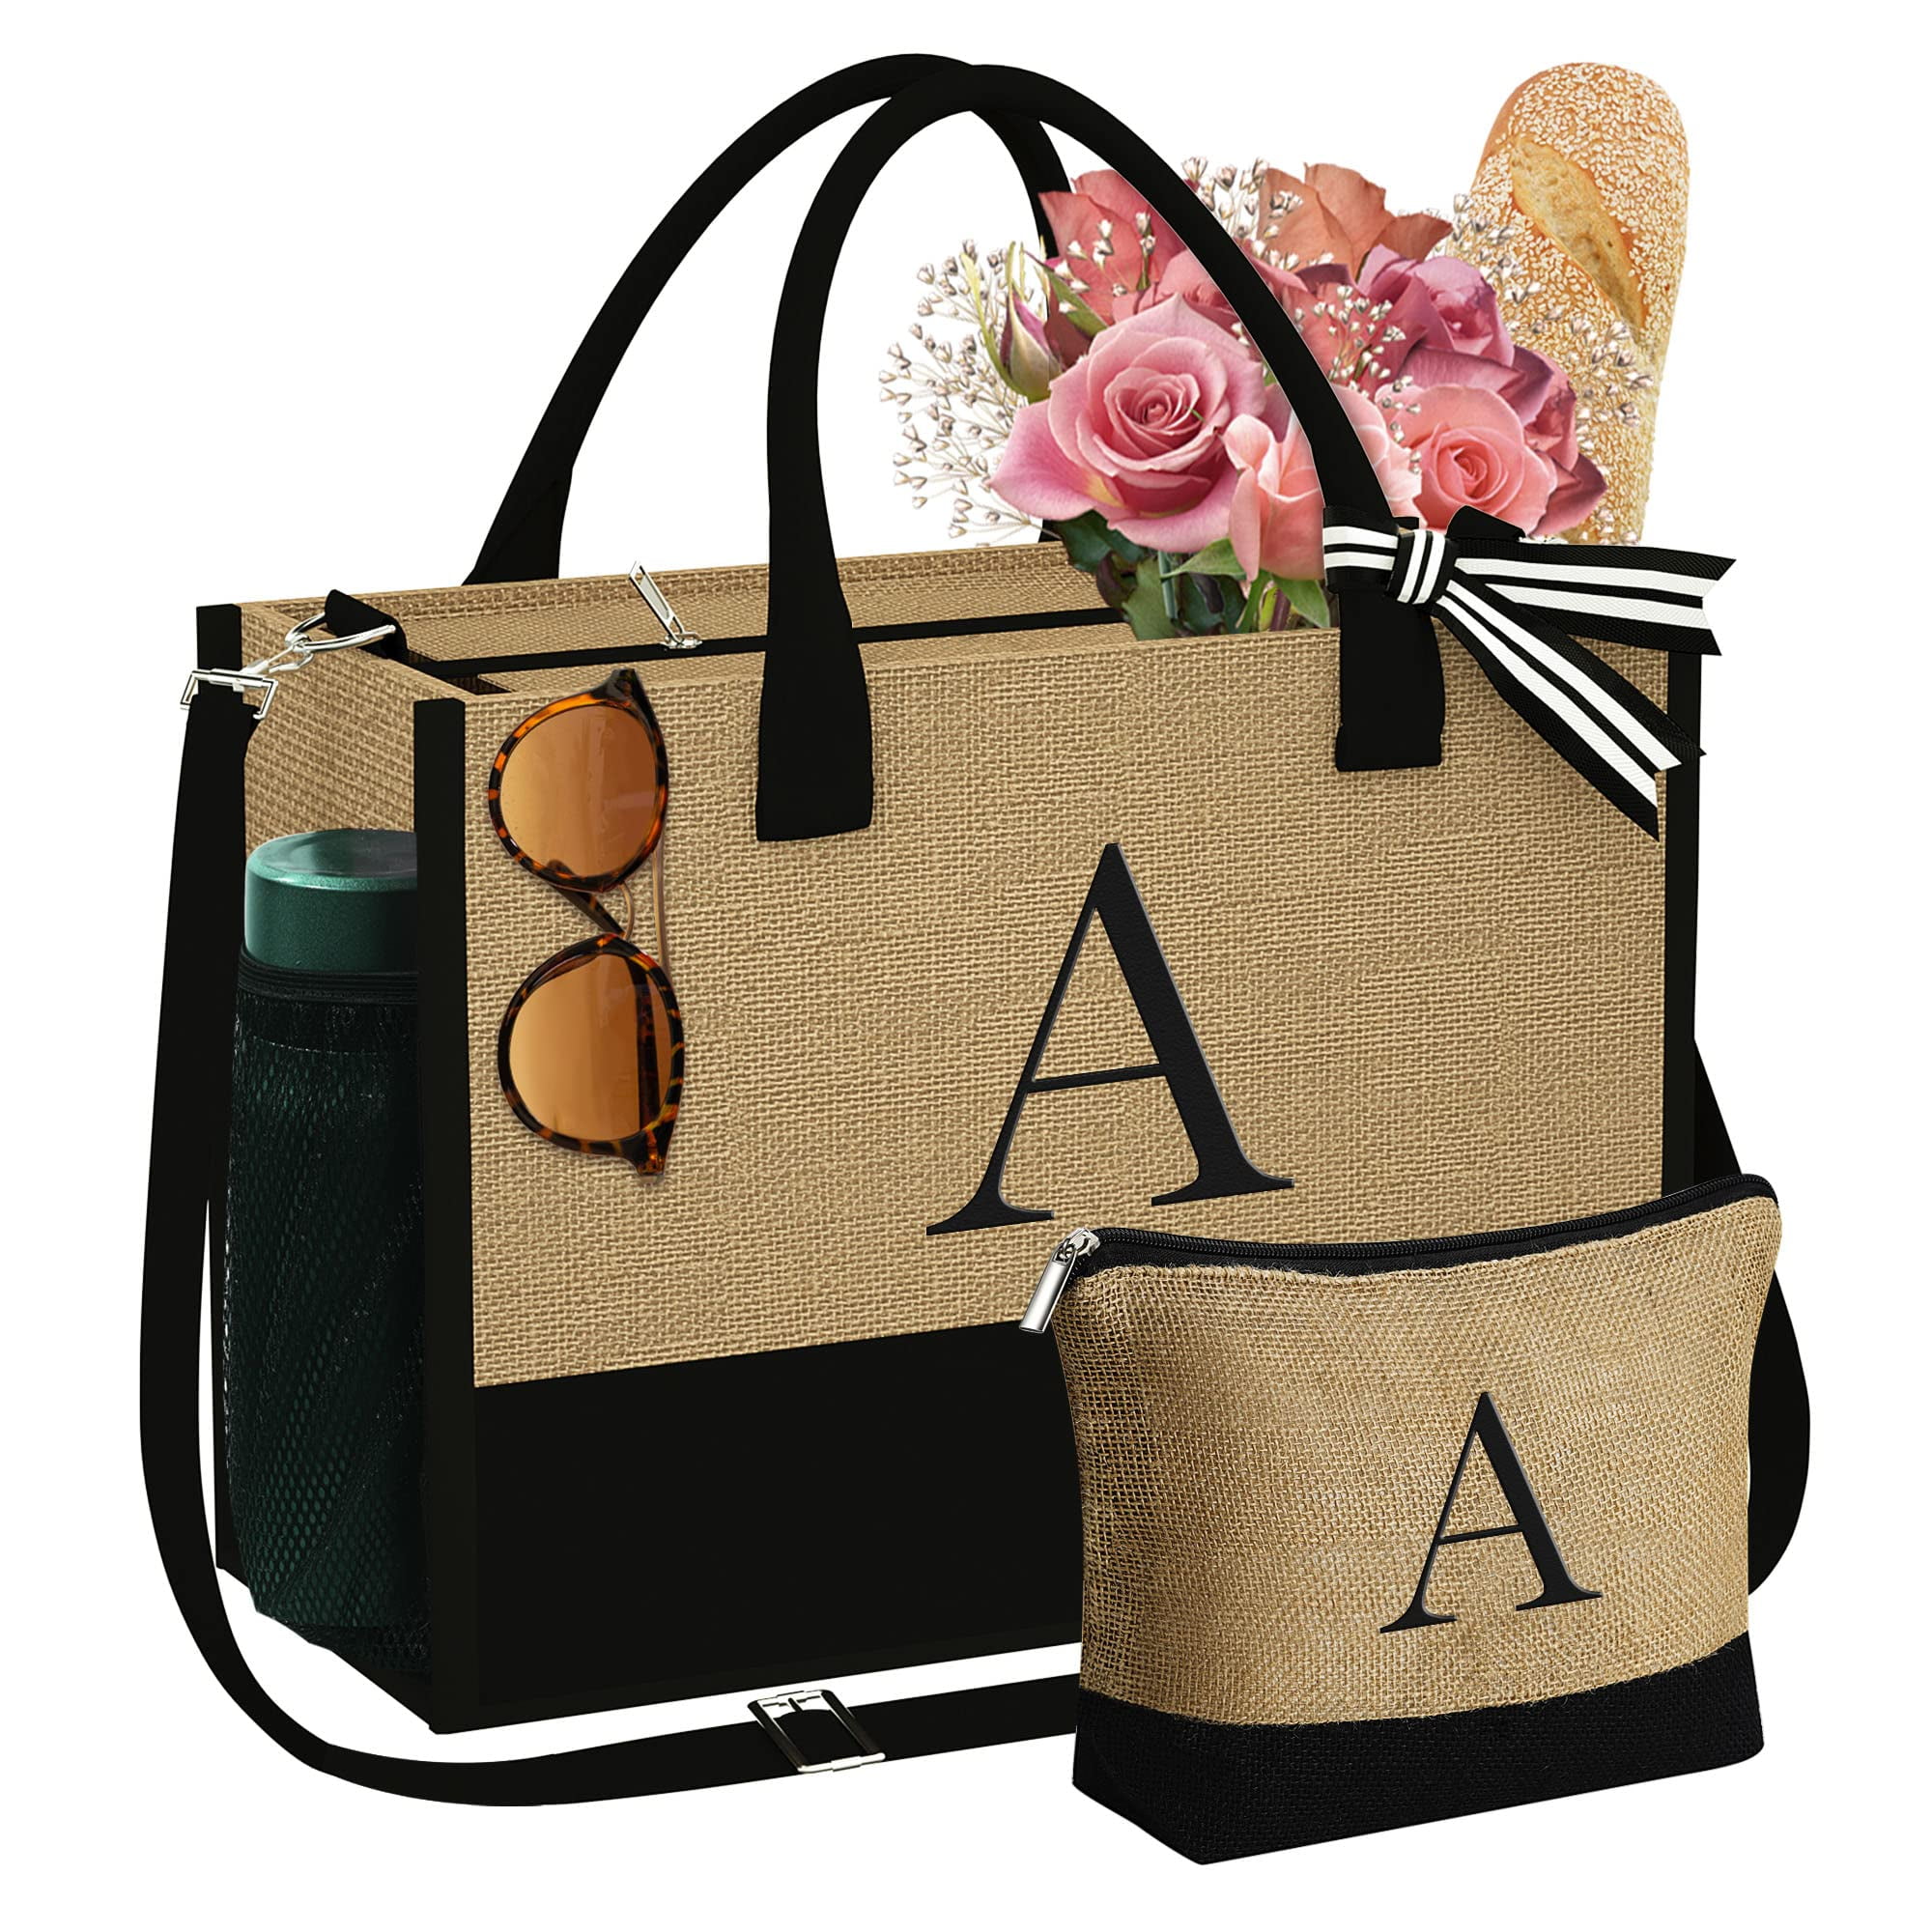 DOQAUS Initial Jute Canvas Tote Bag, with Zipper Pocket Adjustable ...